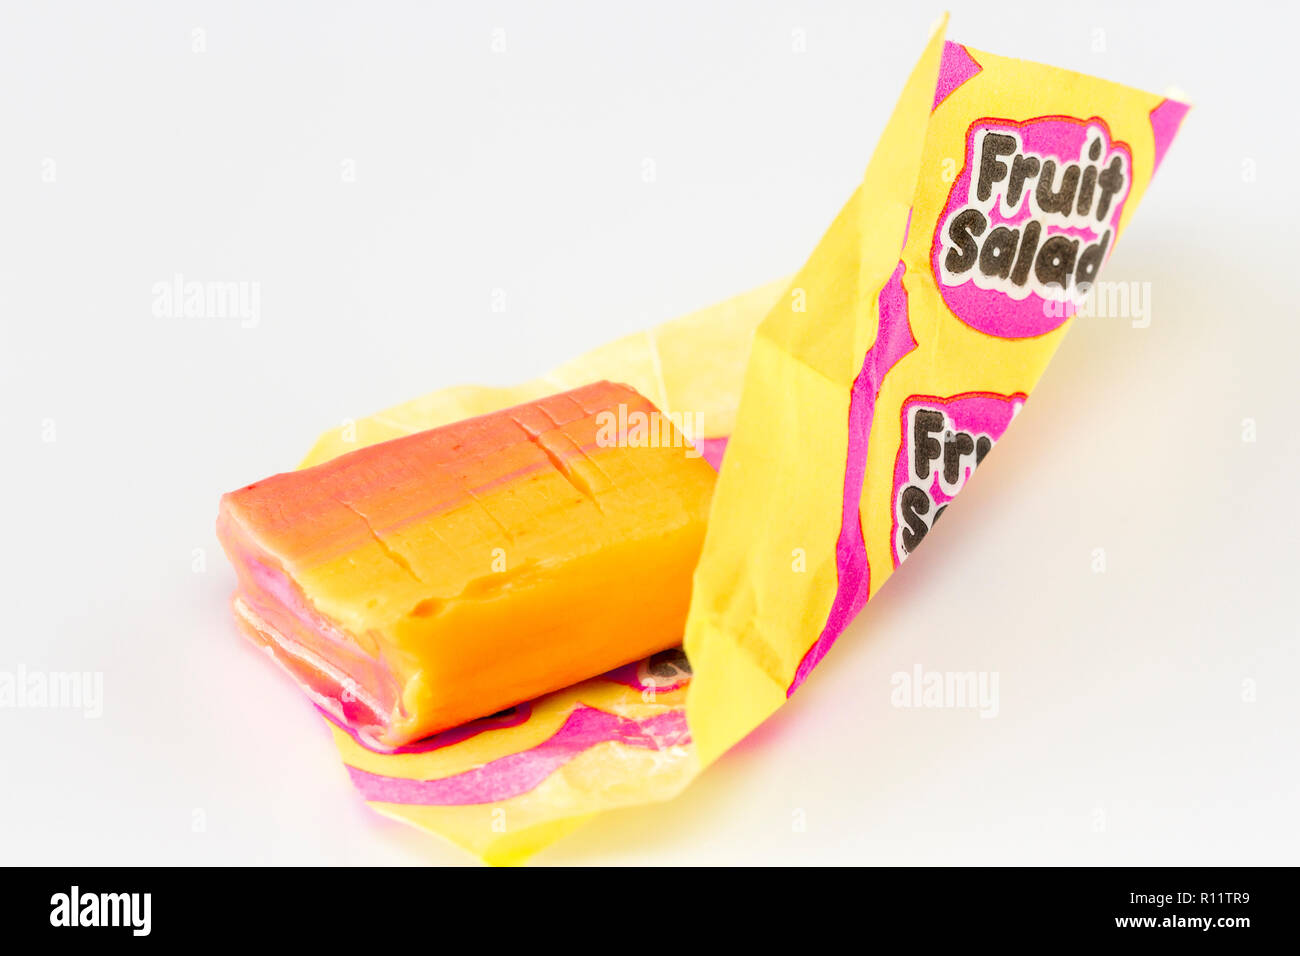 Fruit salad sweet, retro sweet, unwrapped, with wrapper, closeup Stock Photo